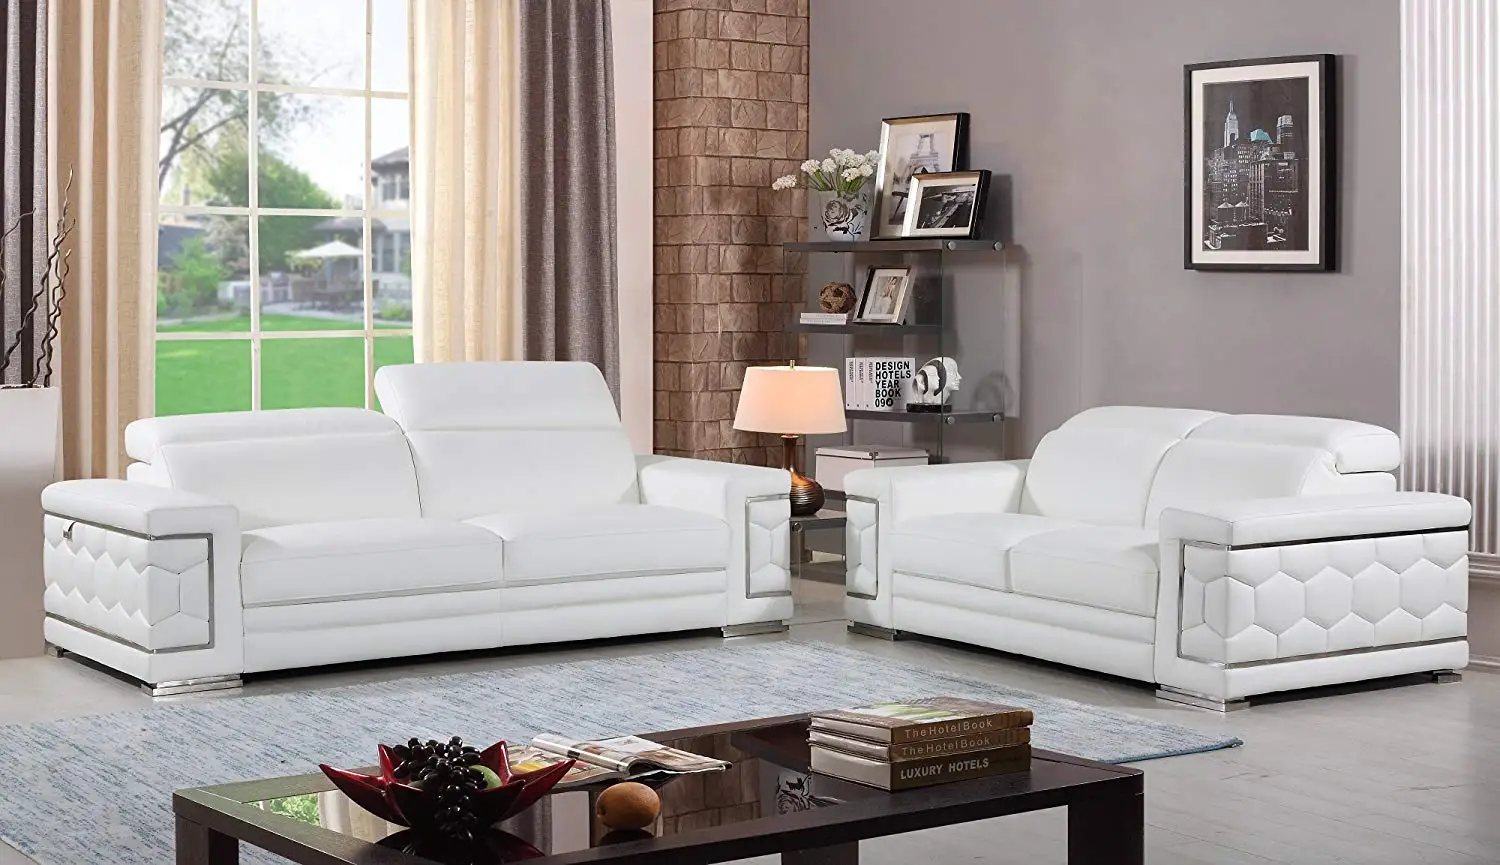 Cheap 2 Piece Leather Sofa Set, find 2 Piece Leather Sofa Set deals on line at 0